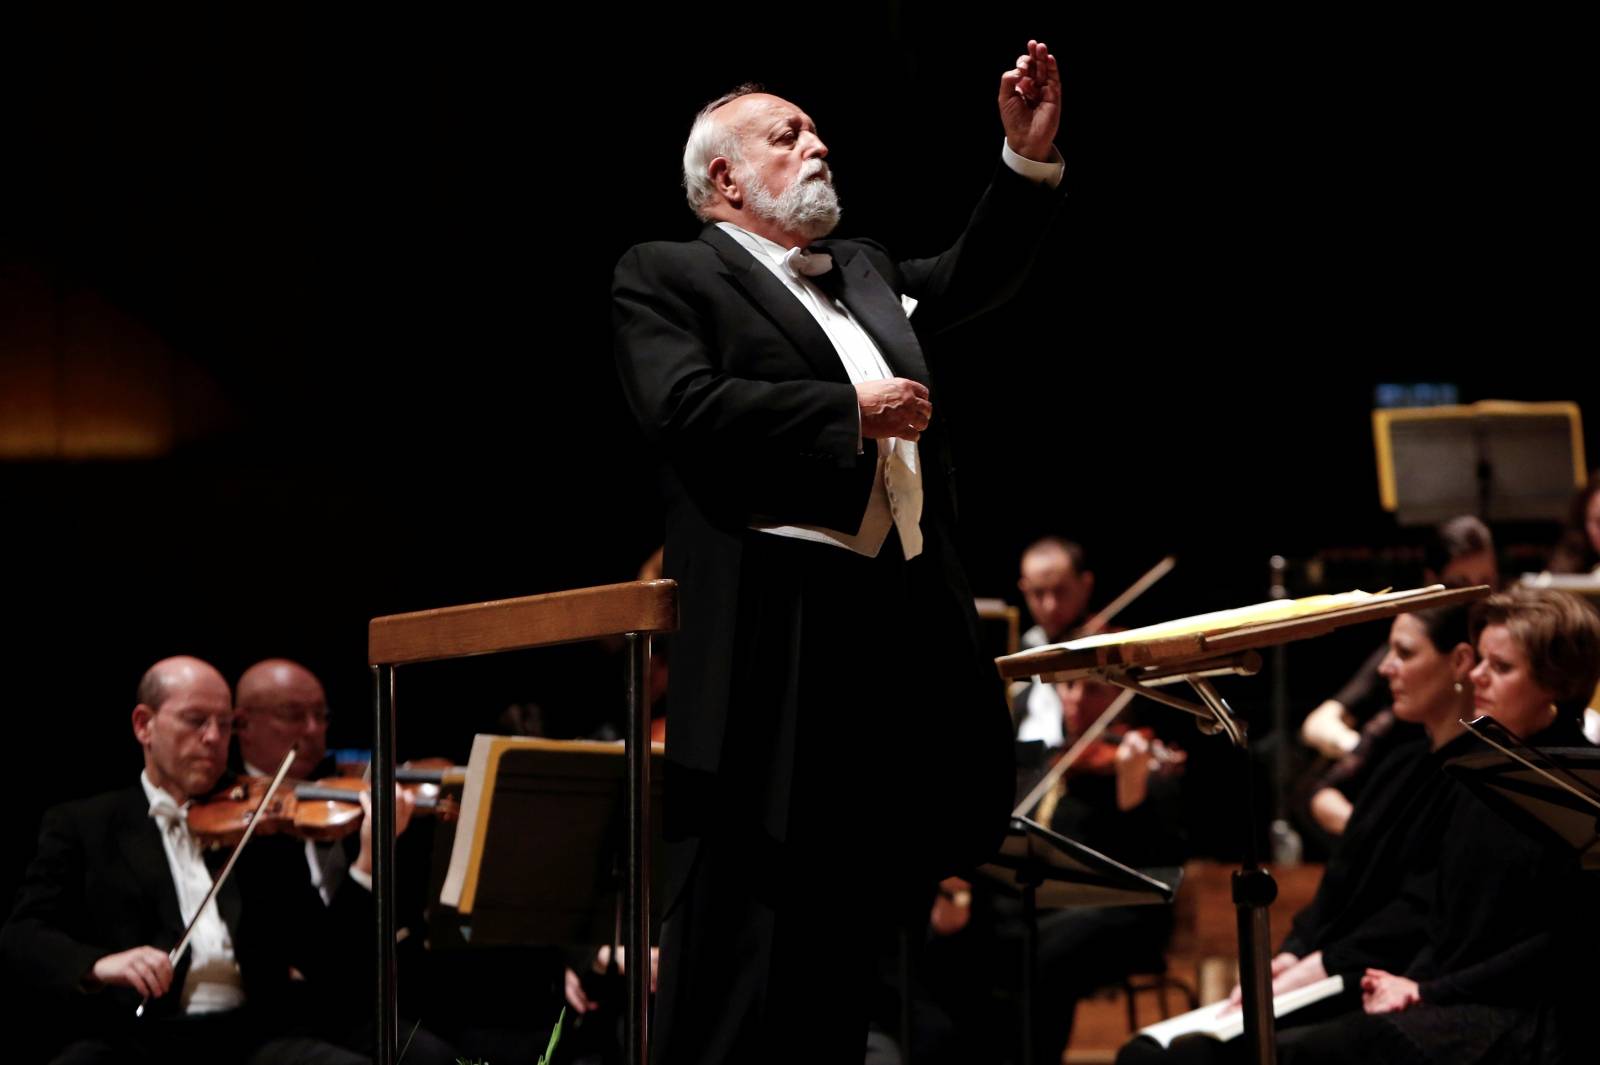 FILE PHOTO: Polish composer Krzysztof Penderecki conducts the Israel Philharmonic Orchestra in Tel Aviv